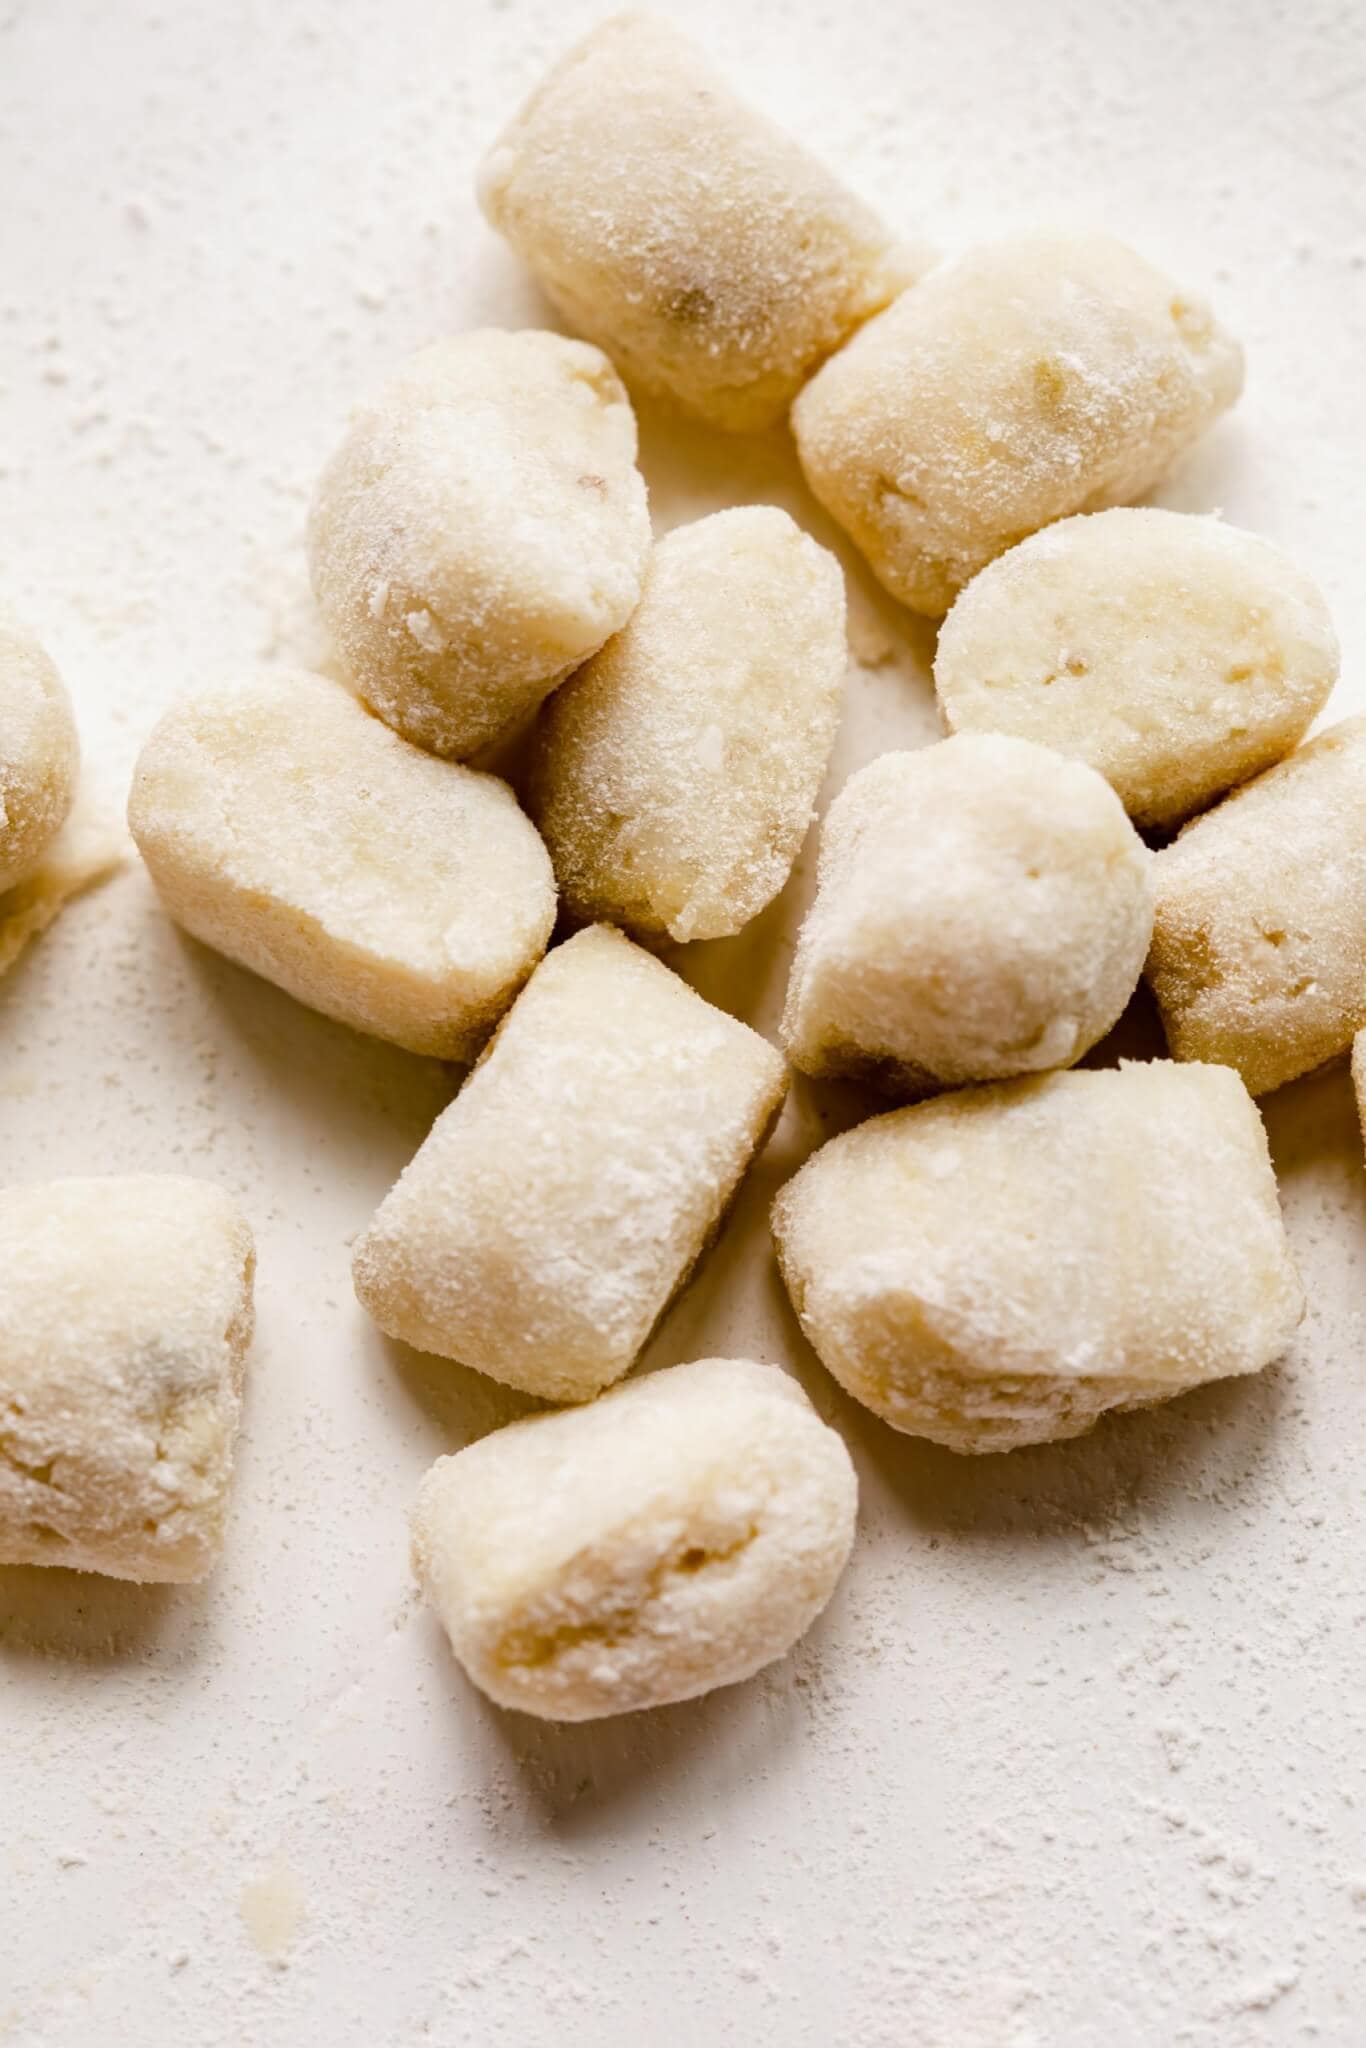 Close up of prepared gnocchi before cooking.